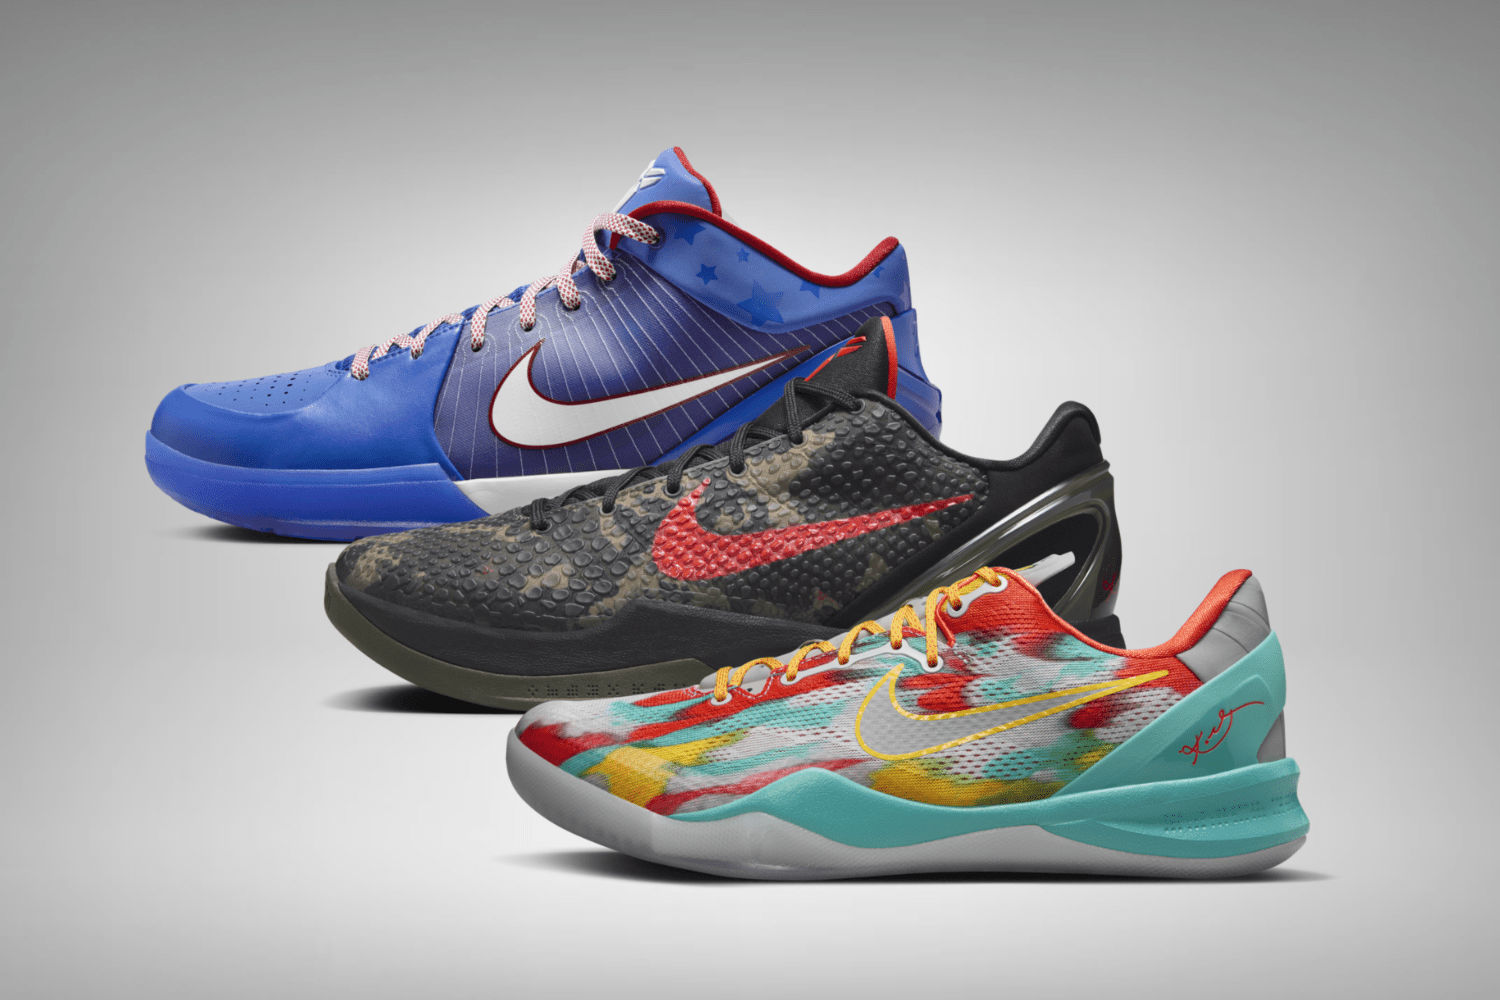 New colorways of the Nike Kobe 4,6 and 8 Protro are dropping this week